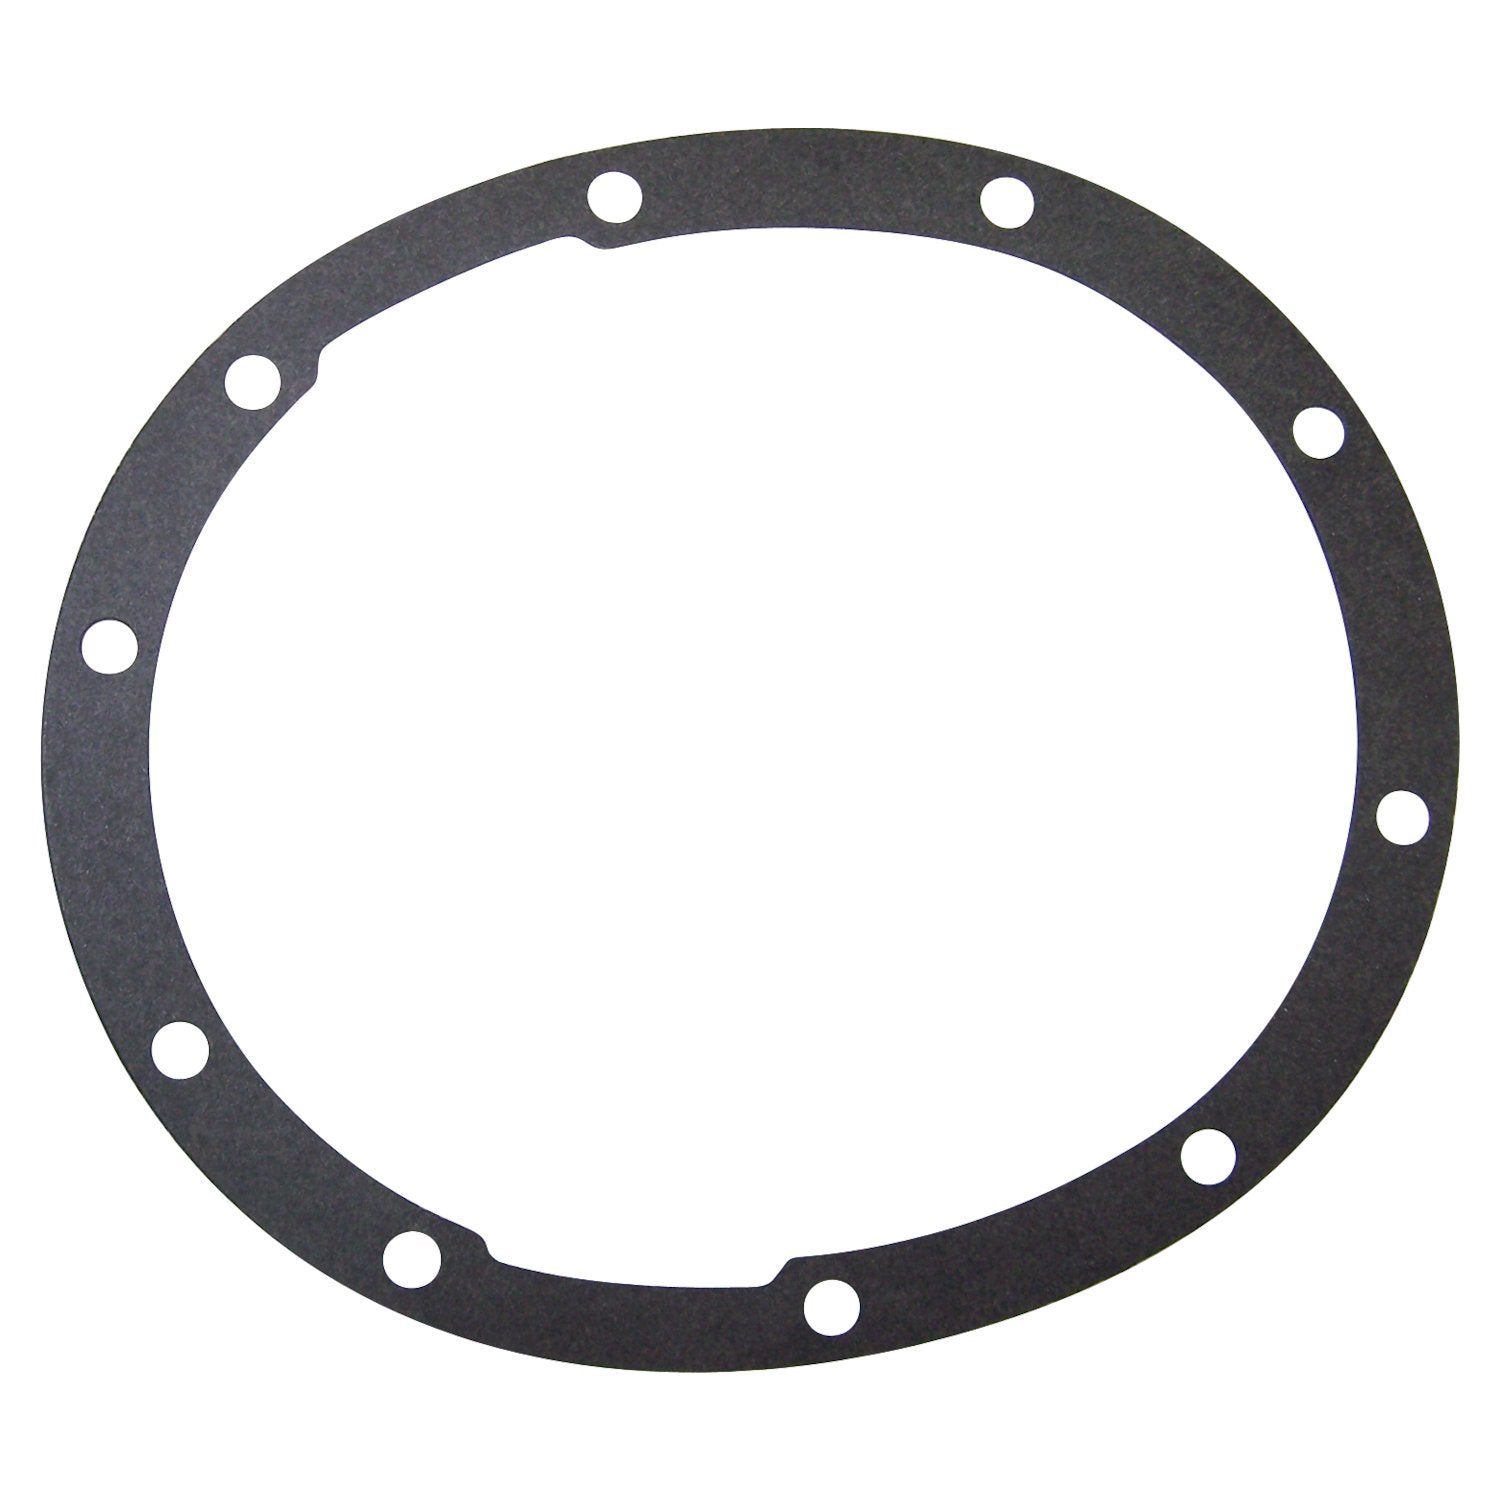 Differential Cover Gasket for Various Jeep Vehicles w/ Dana 35 Rear Axle